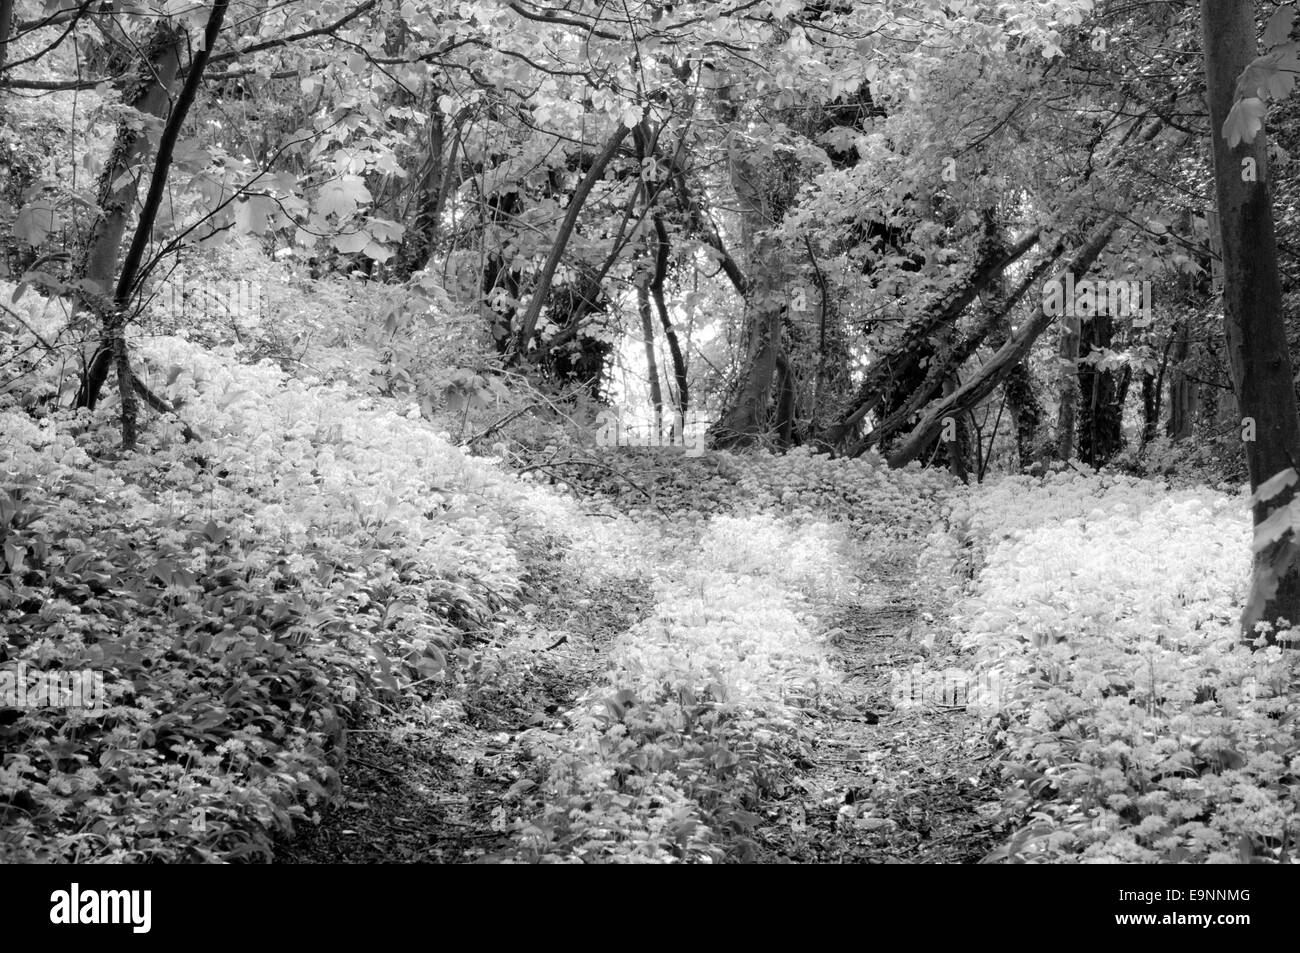 Coombe wood near Amberley when the Ransoms are in flower which almost looks like an infra-red shot in black and white Stock Photo